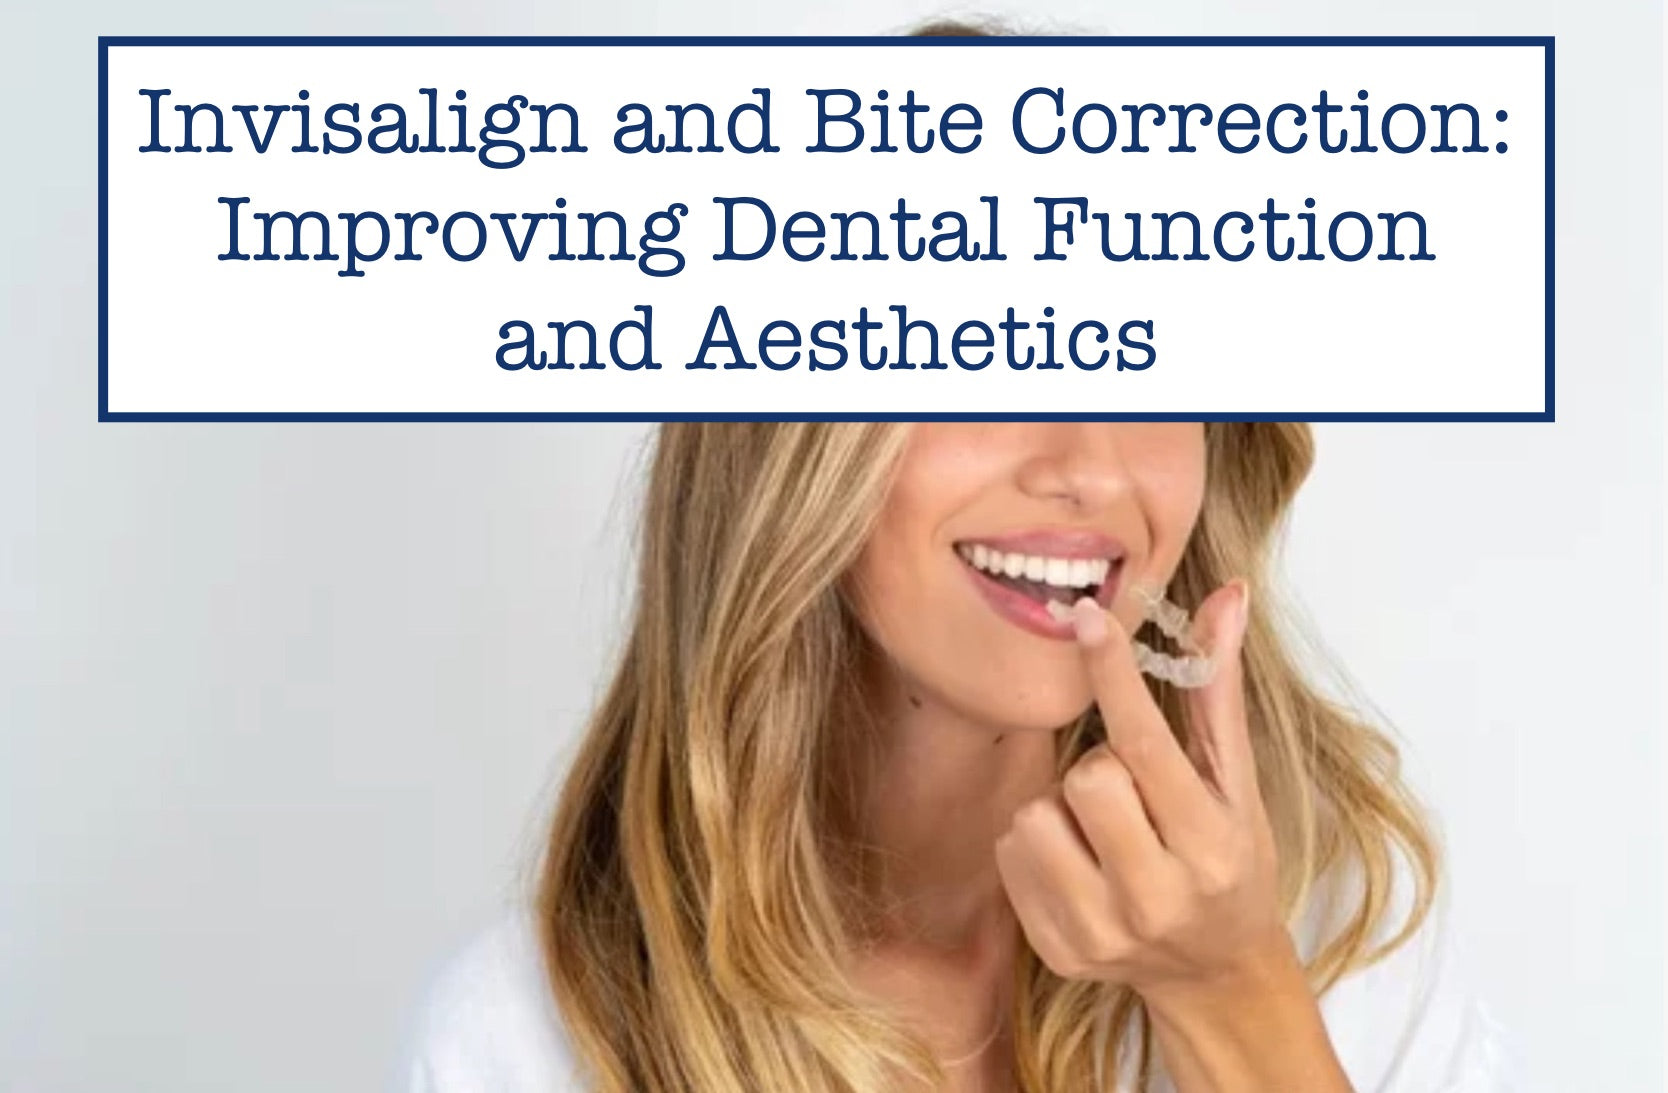 Invisalign and Bite Correction: Improving Dental Function and Aesthetics